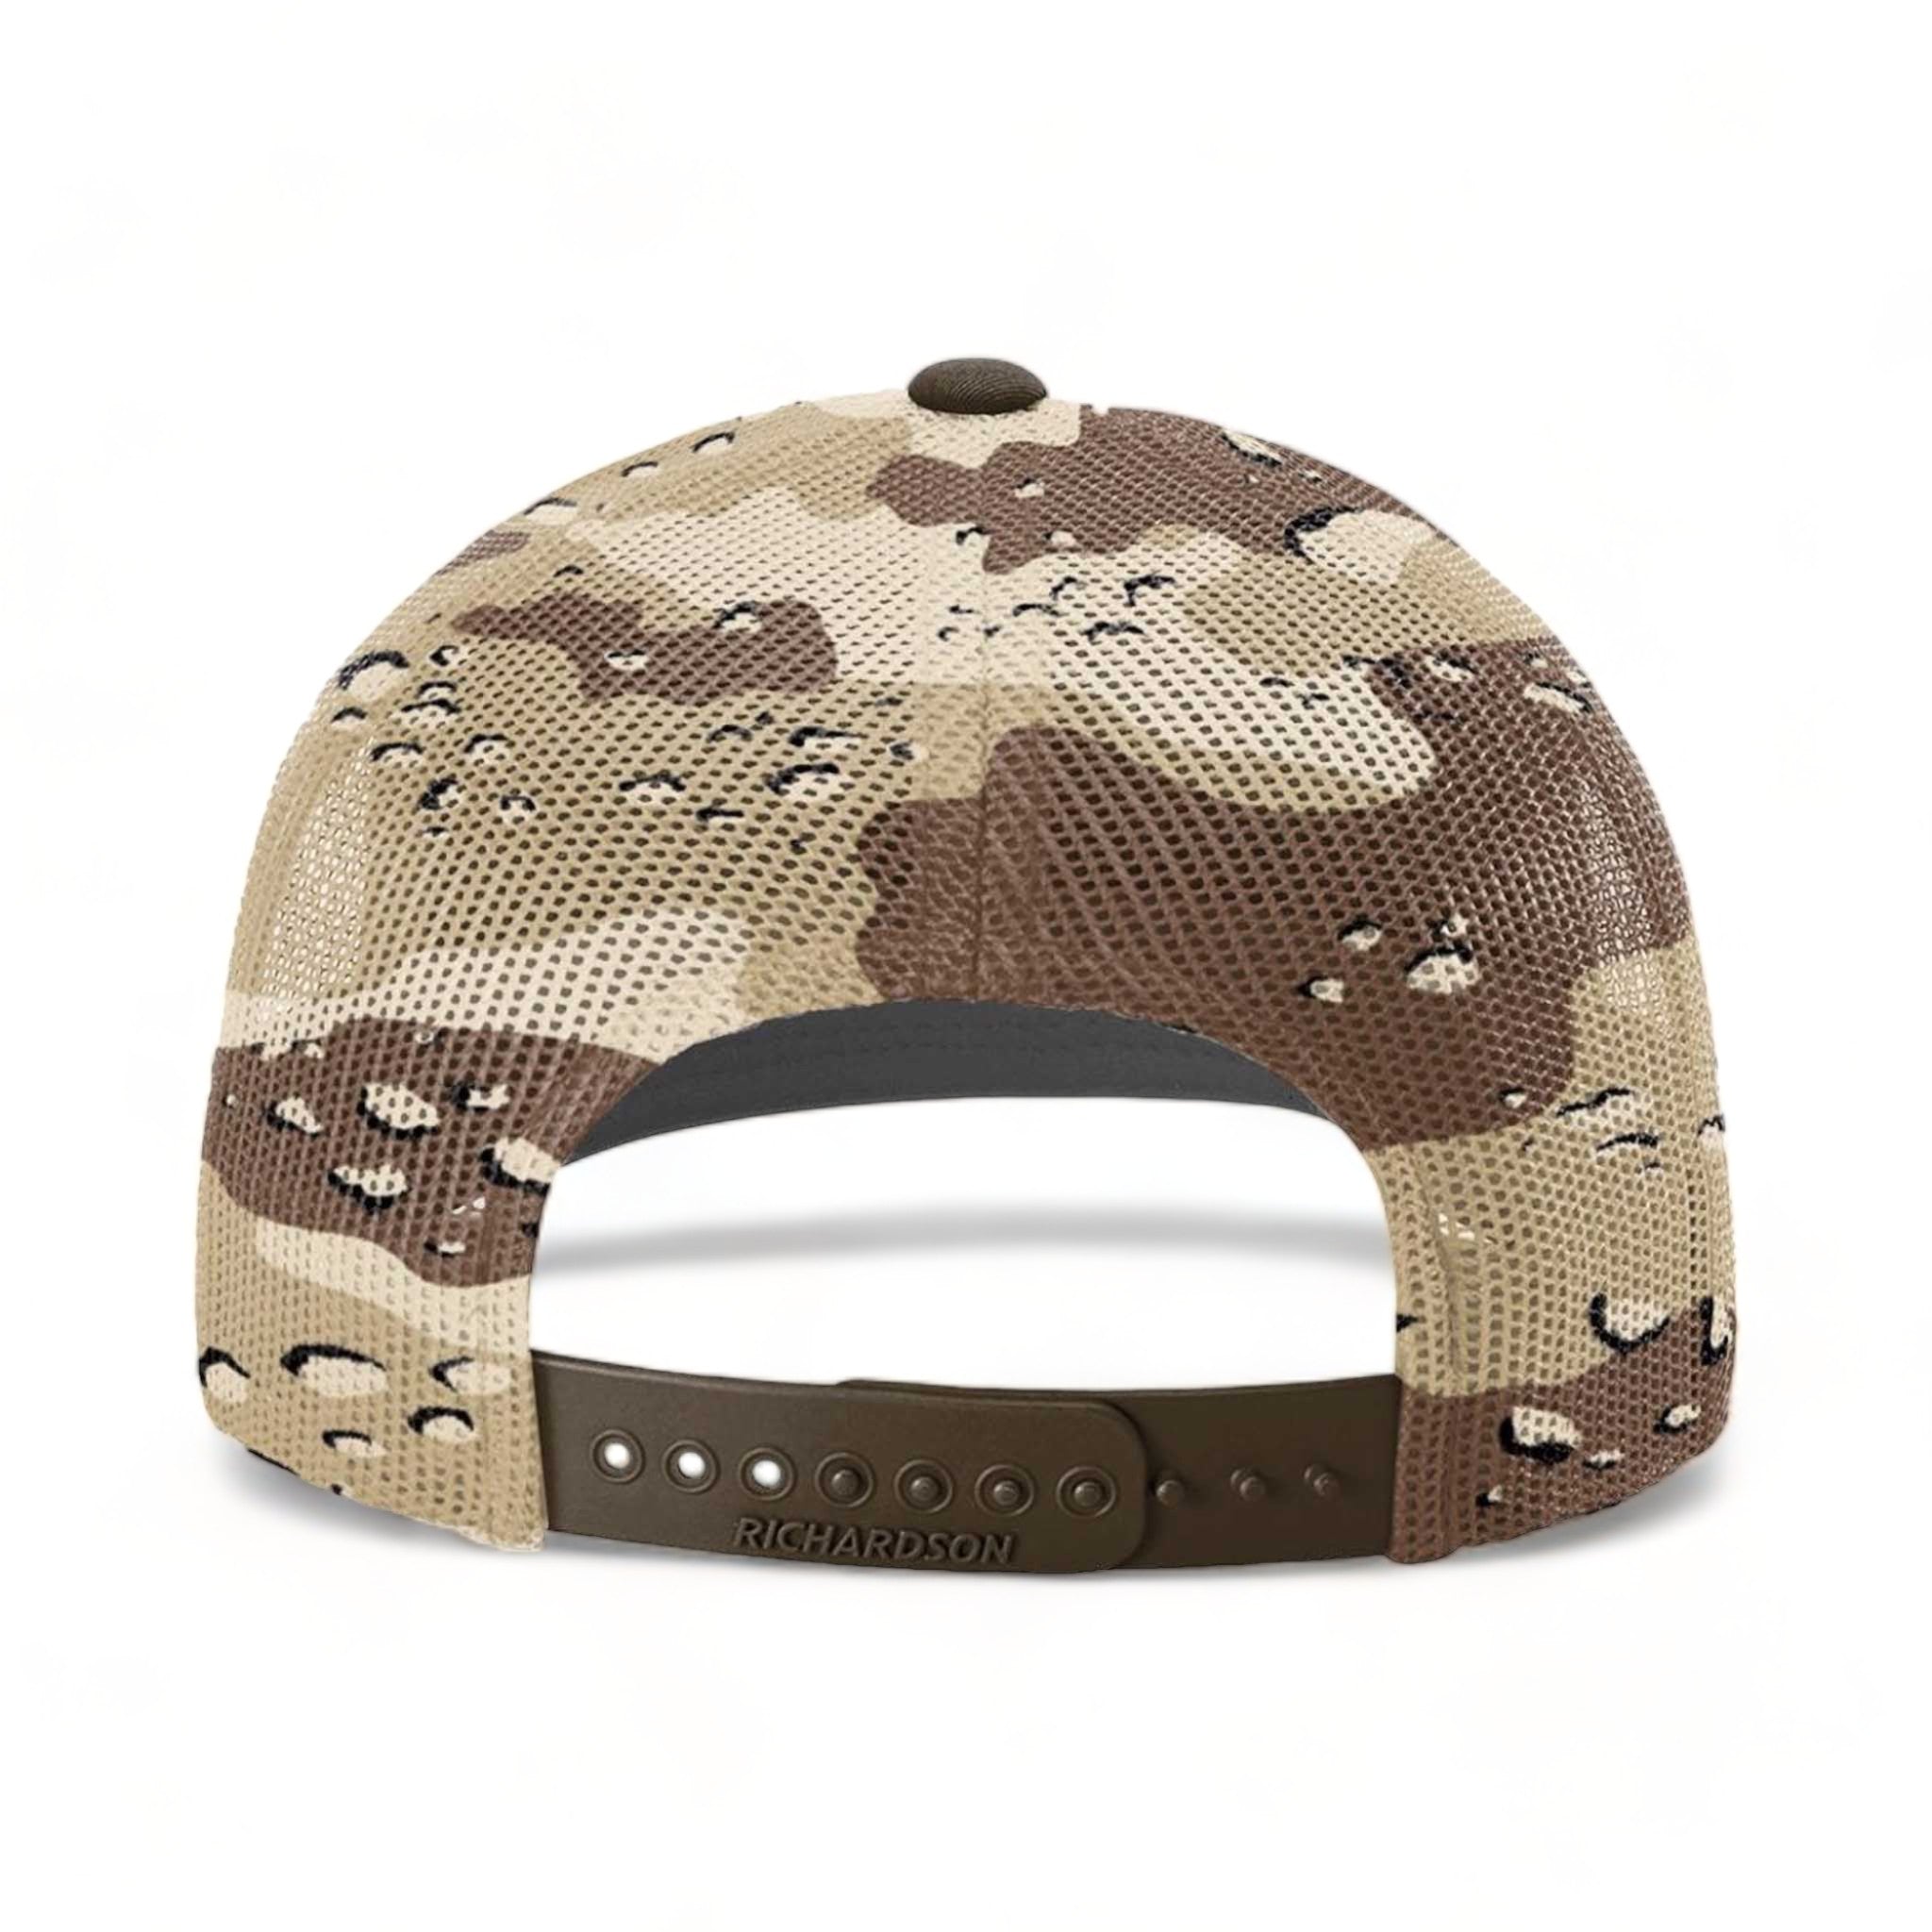 Back view of Richardson 112PM custom hat in brown and desert camo